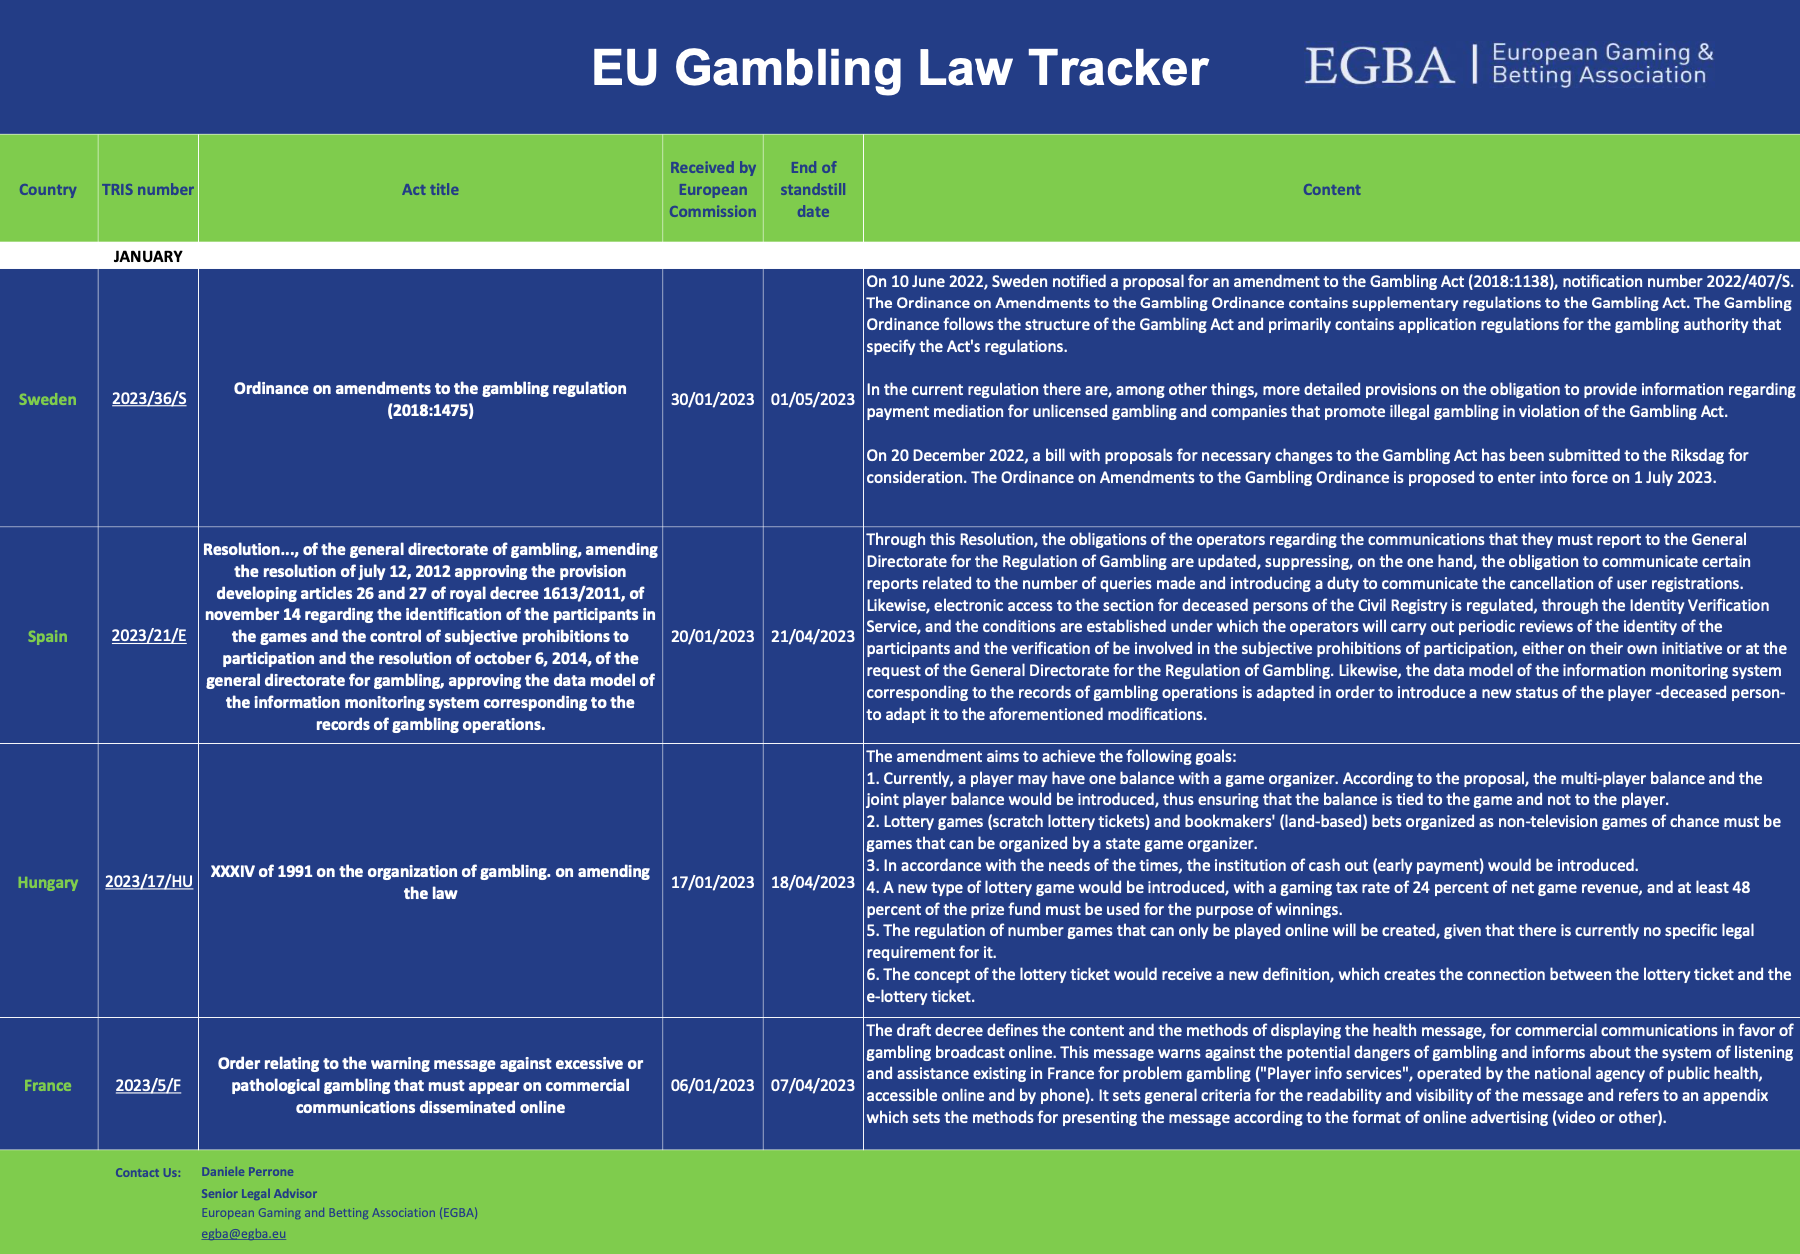 Belgium - EGBA publishes first pan-European AML guidelines for online gaming  G3 Newswire Legislation